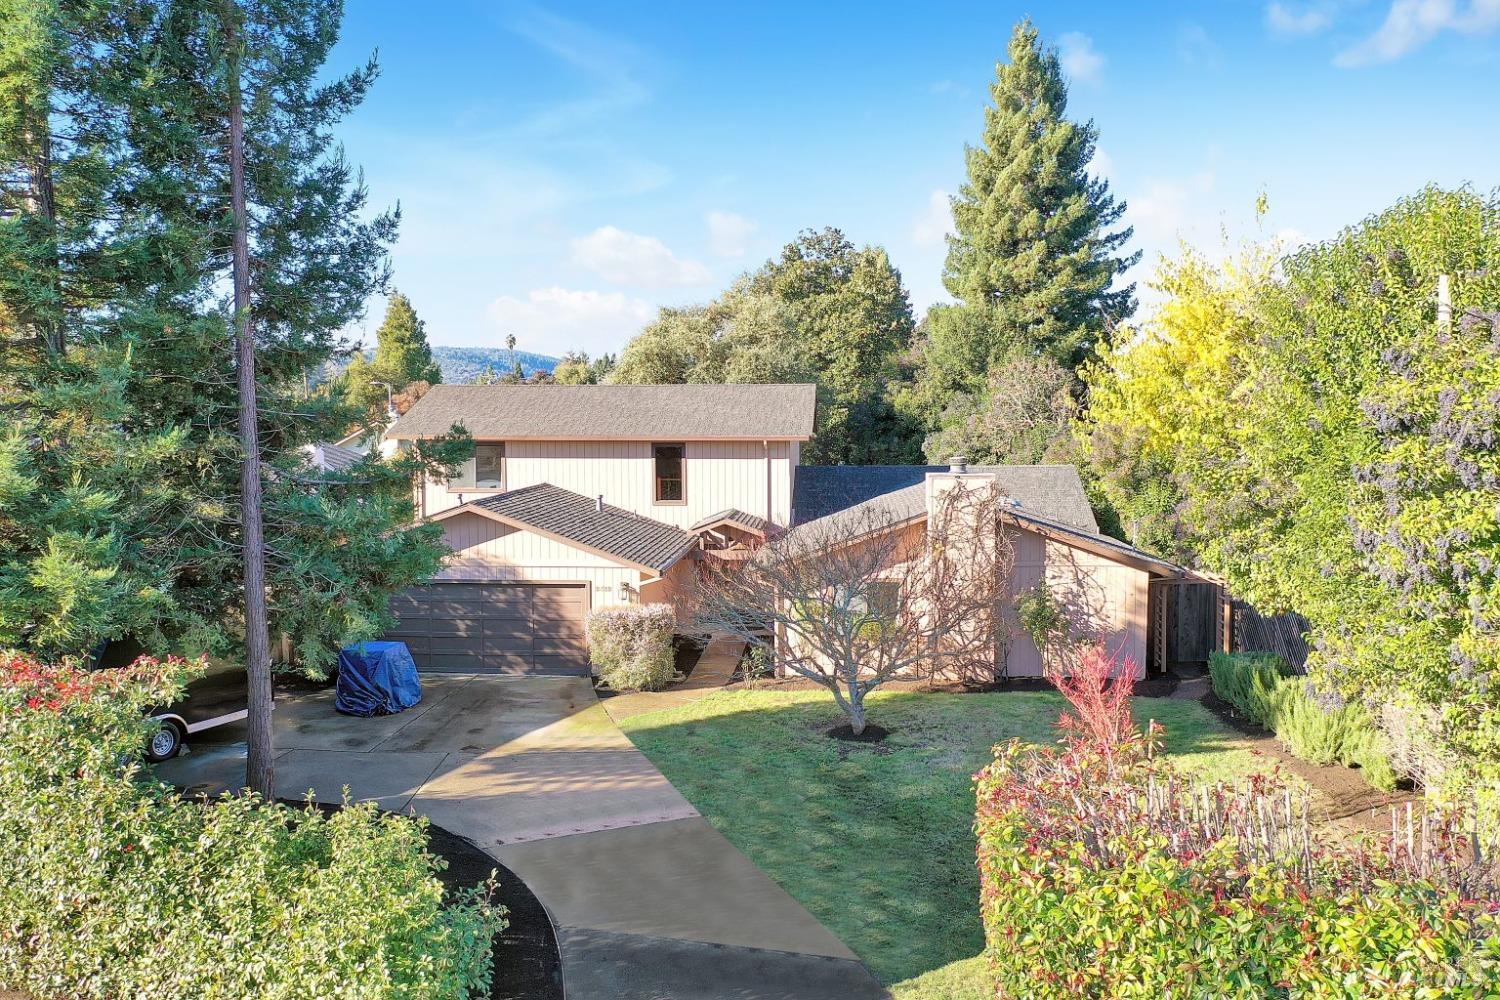 Photo of 2512 Redwood Rd in Napa, CA